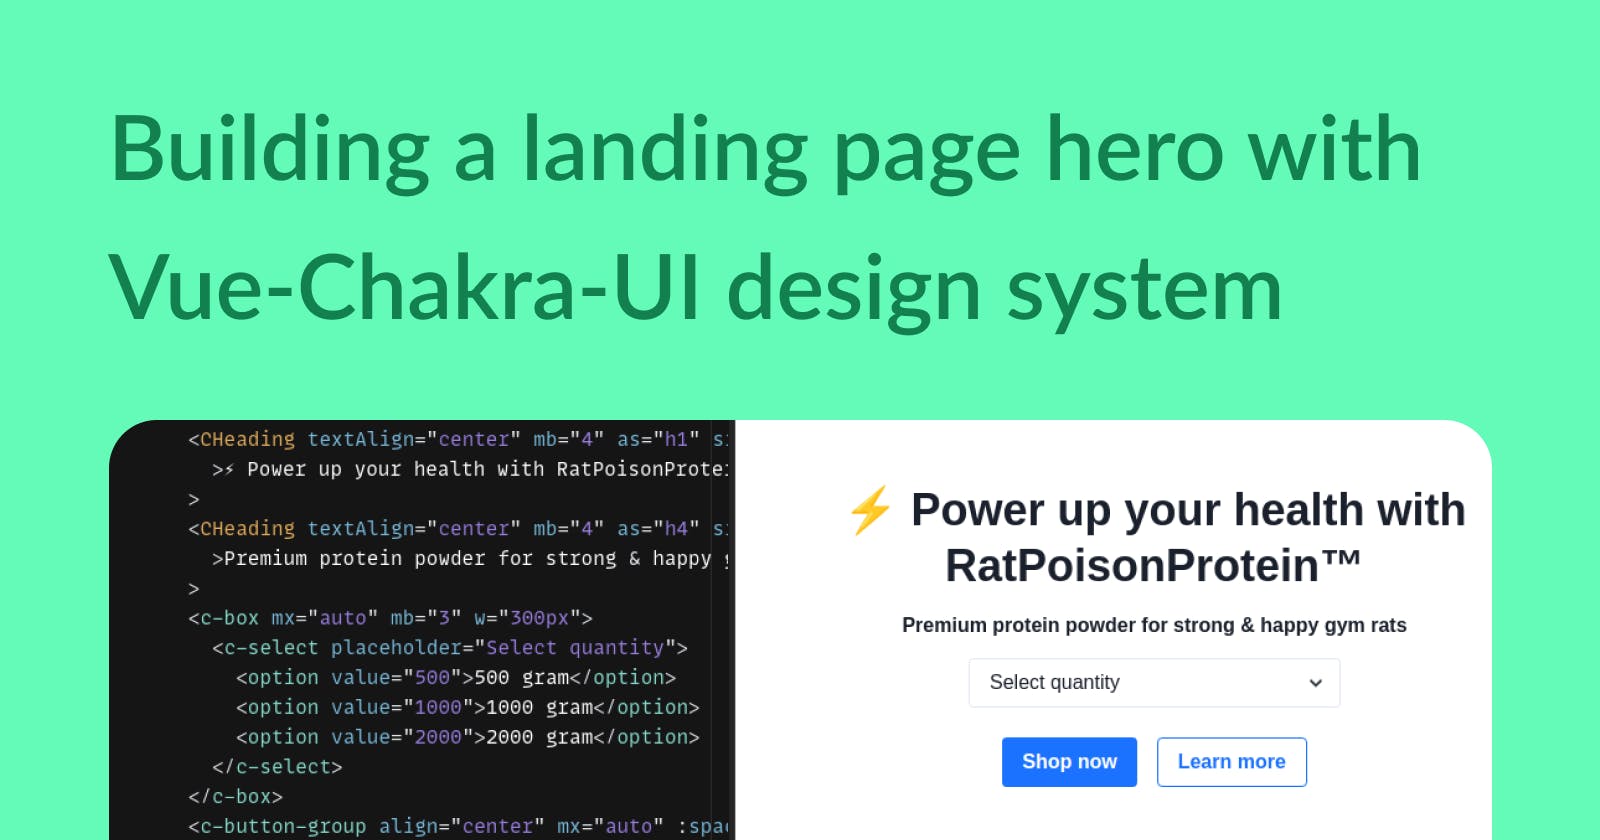 Building a landing page hero with Vue-Chakra-UI design system